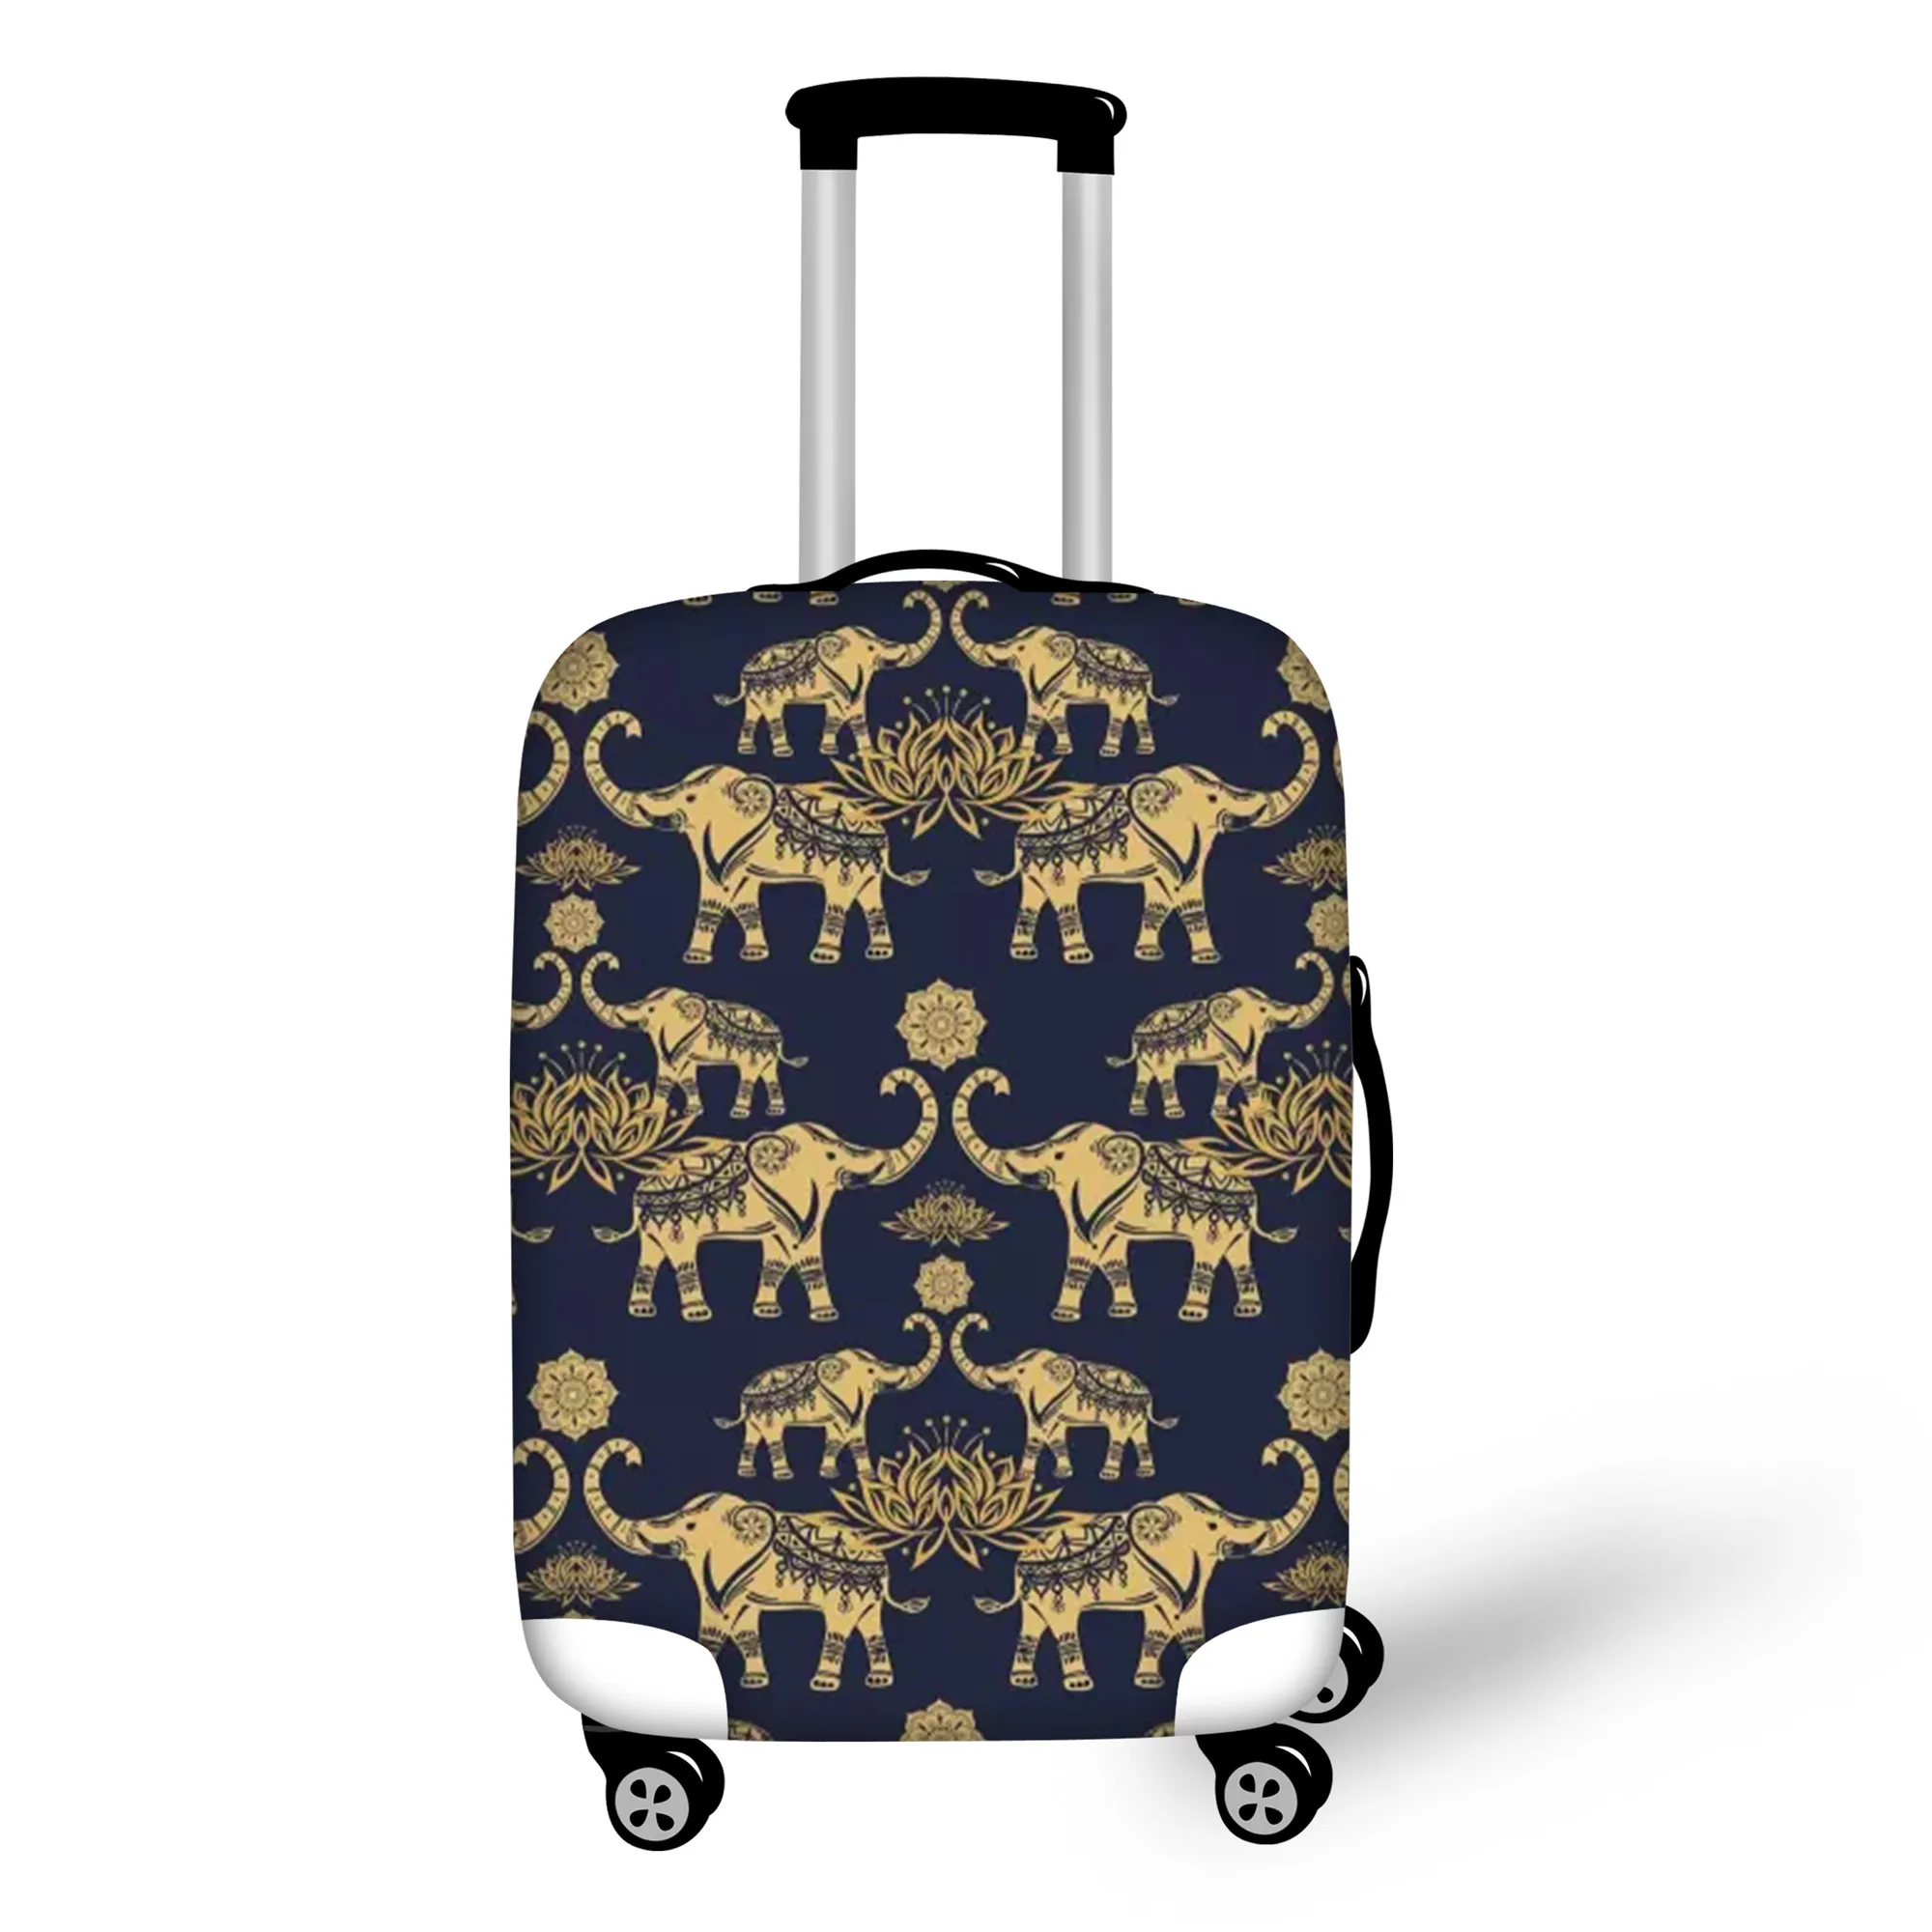 FORUDESIGNS Elastic Luggage Covers Art Elephant And Lotus Travel Accessories Trolley Baggage Apply to 18-32inch Suitcase Covers - Цвет: QB024